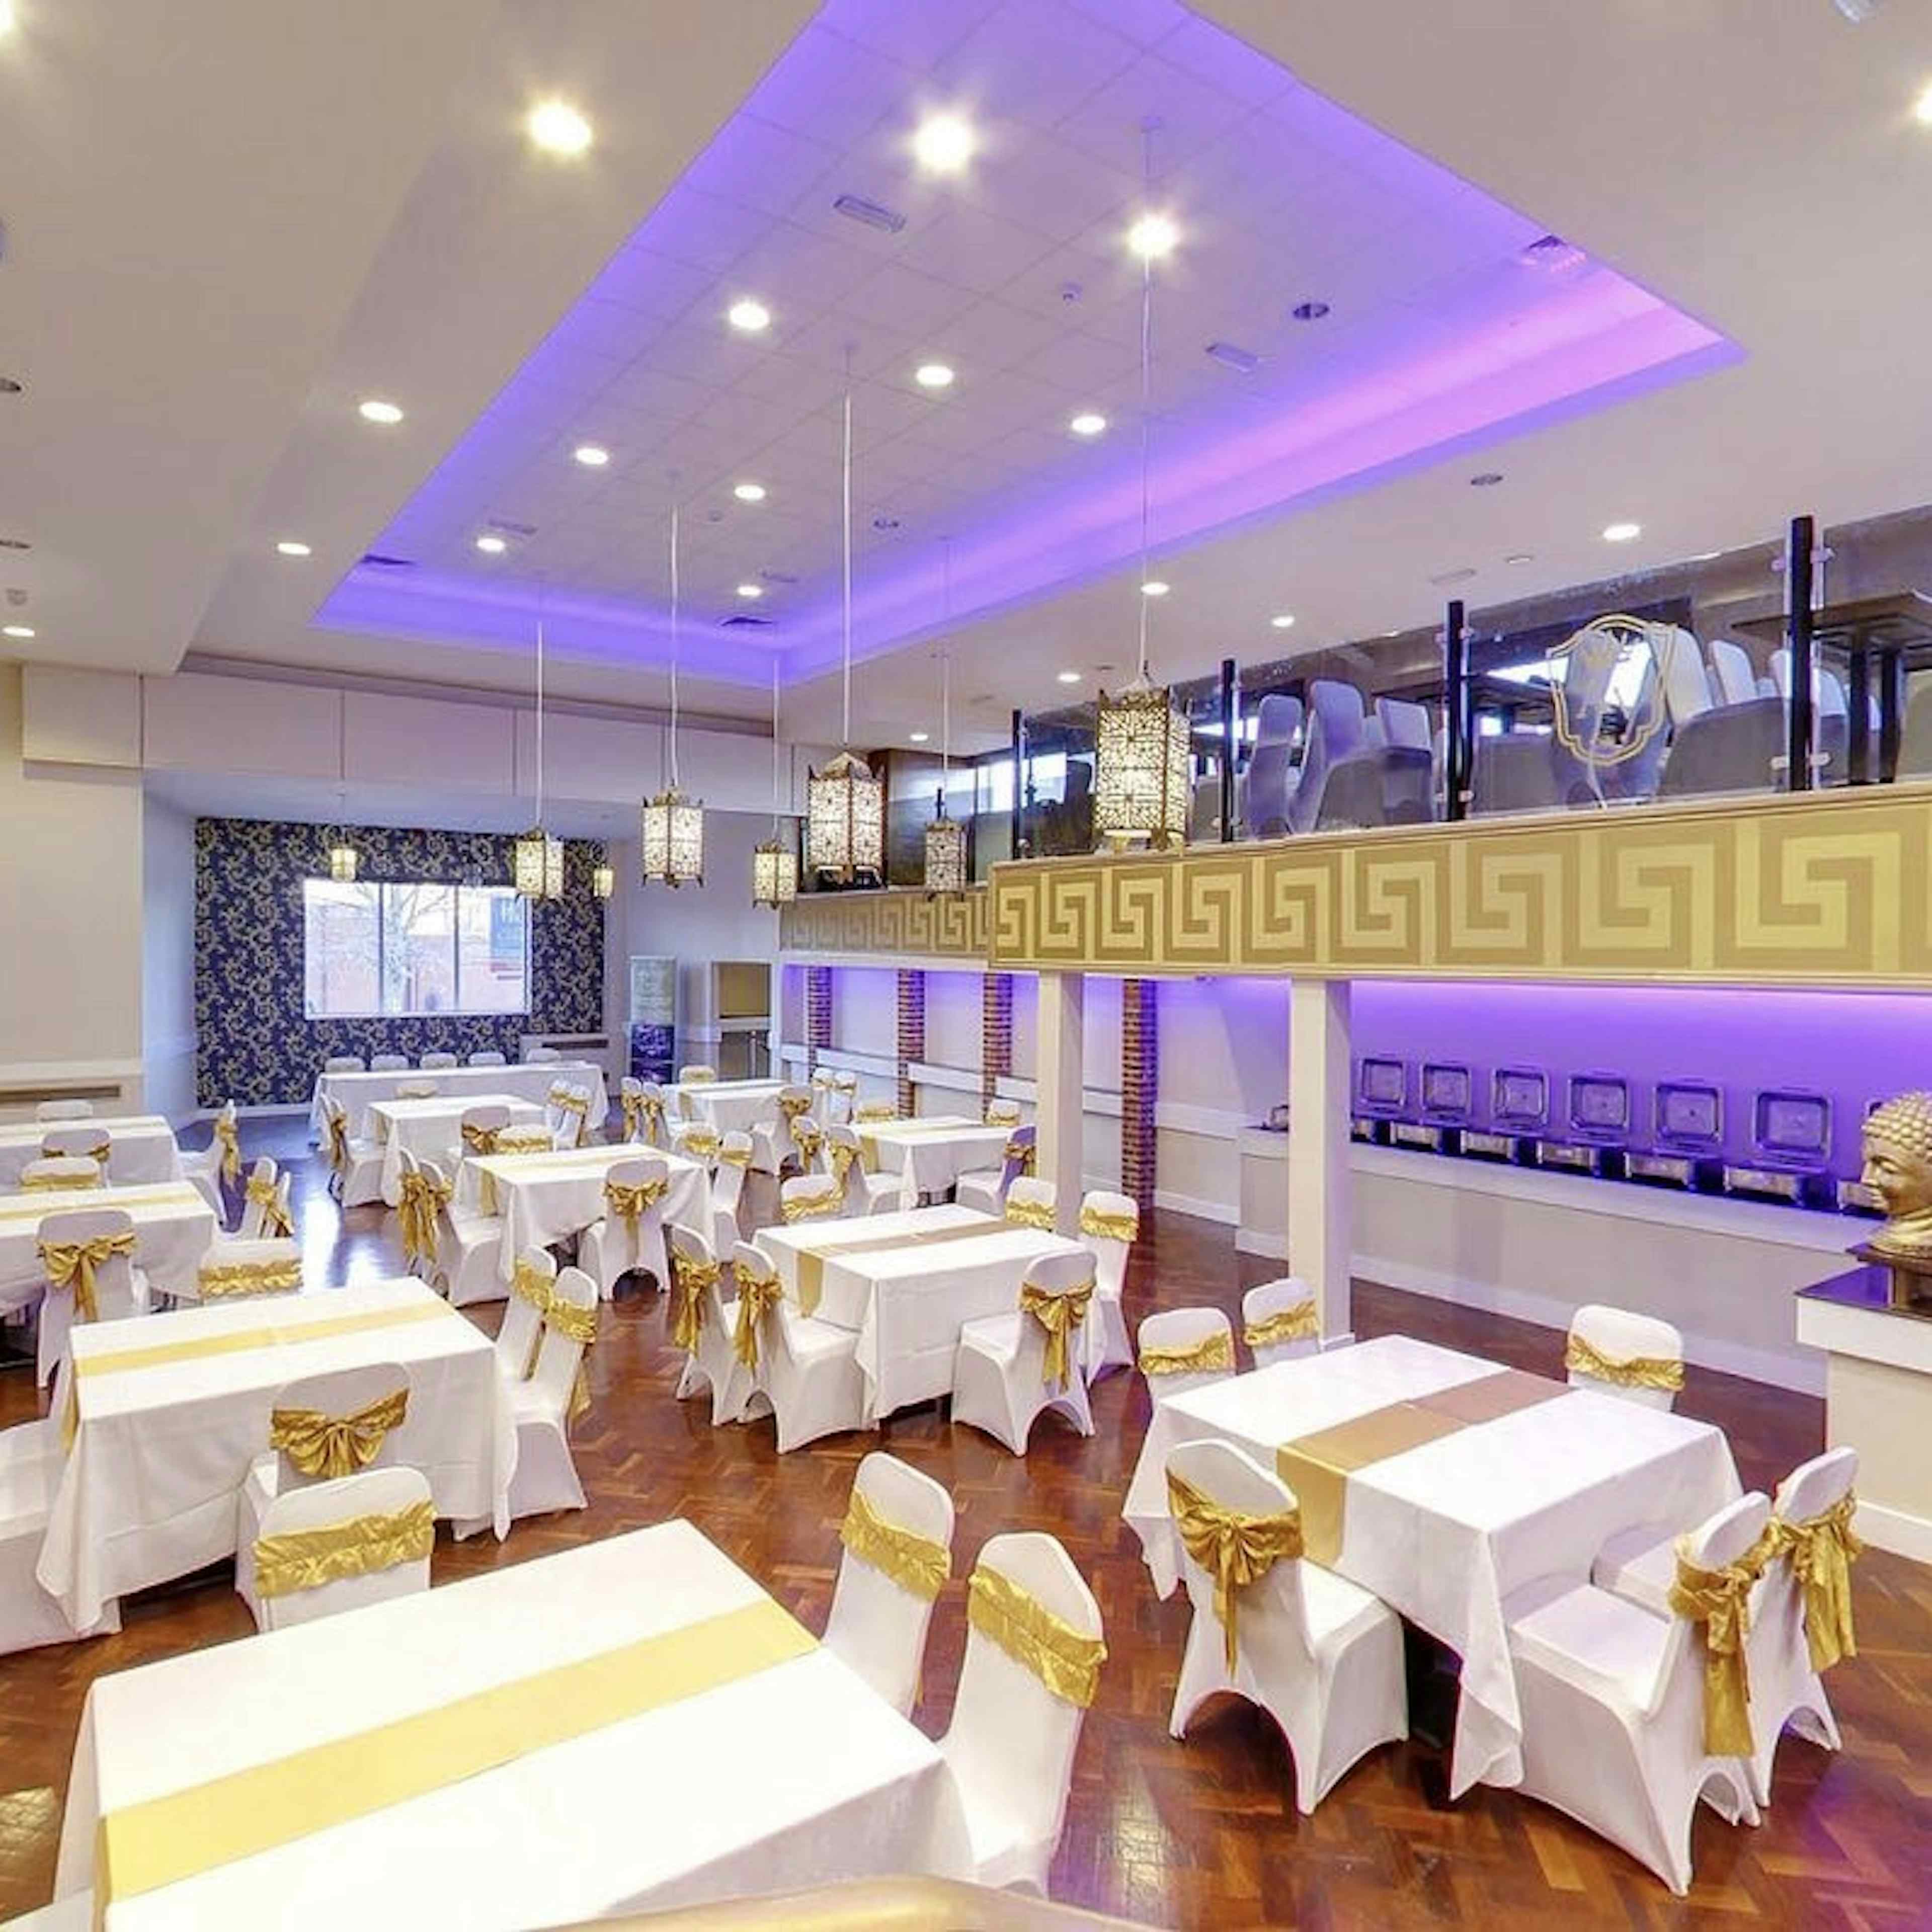 Avantay banqueting suite - Corporate image 3